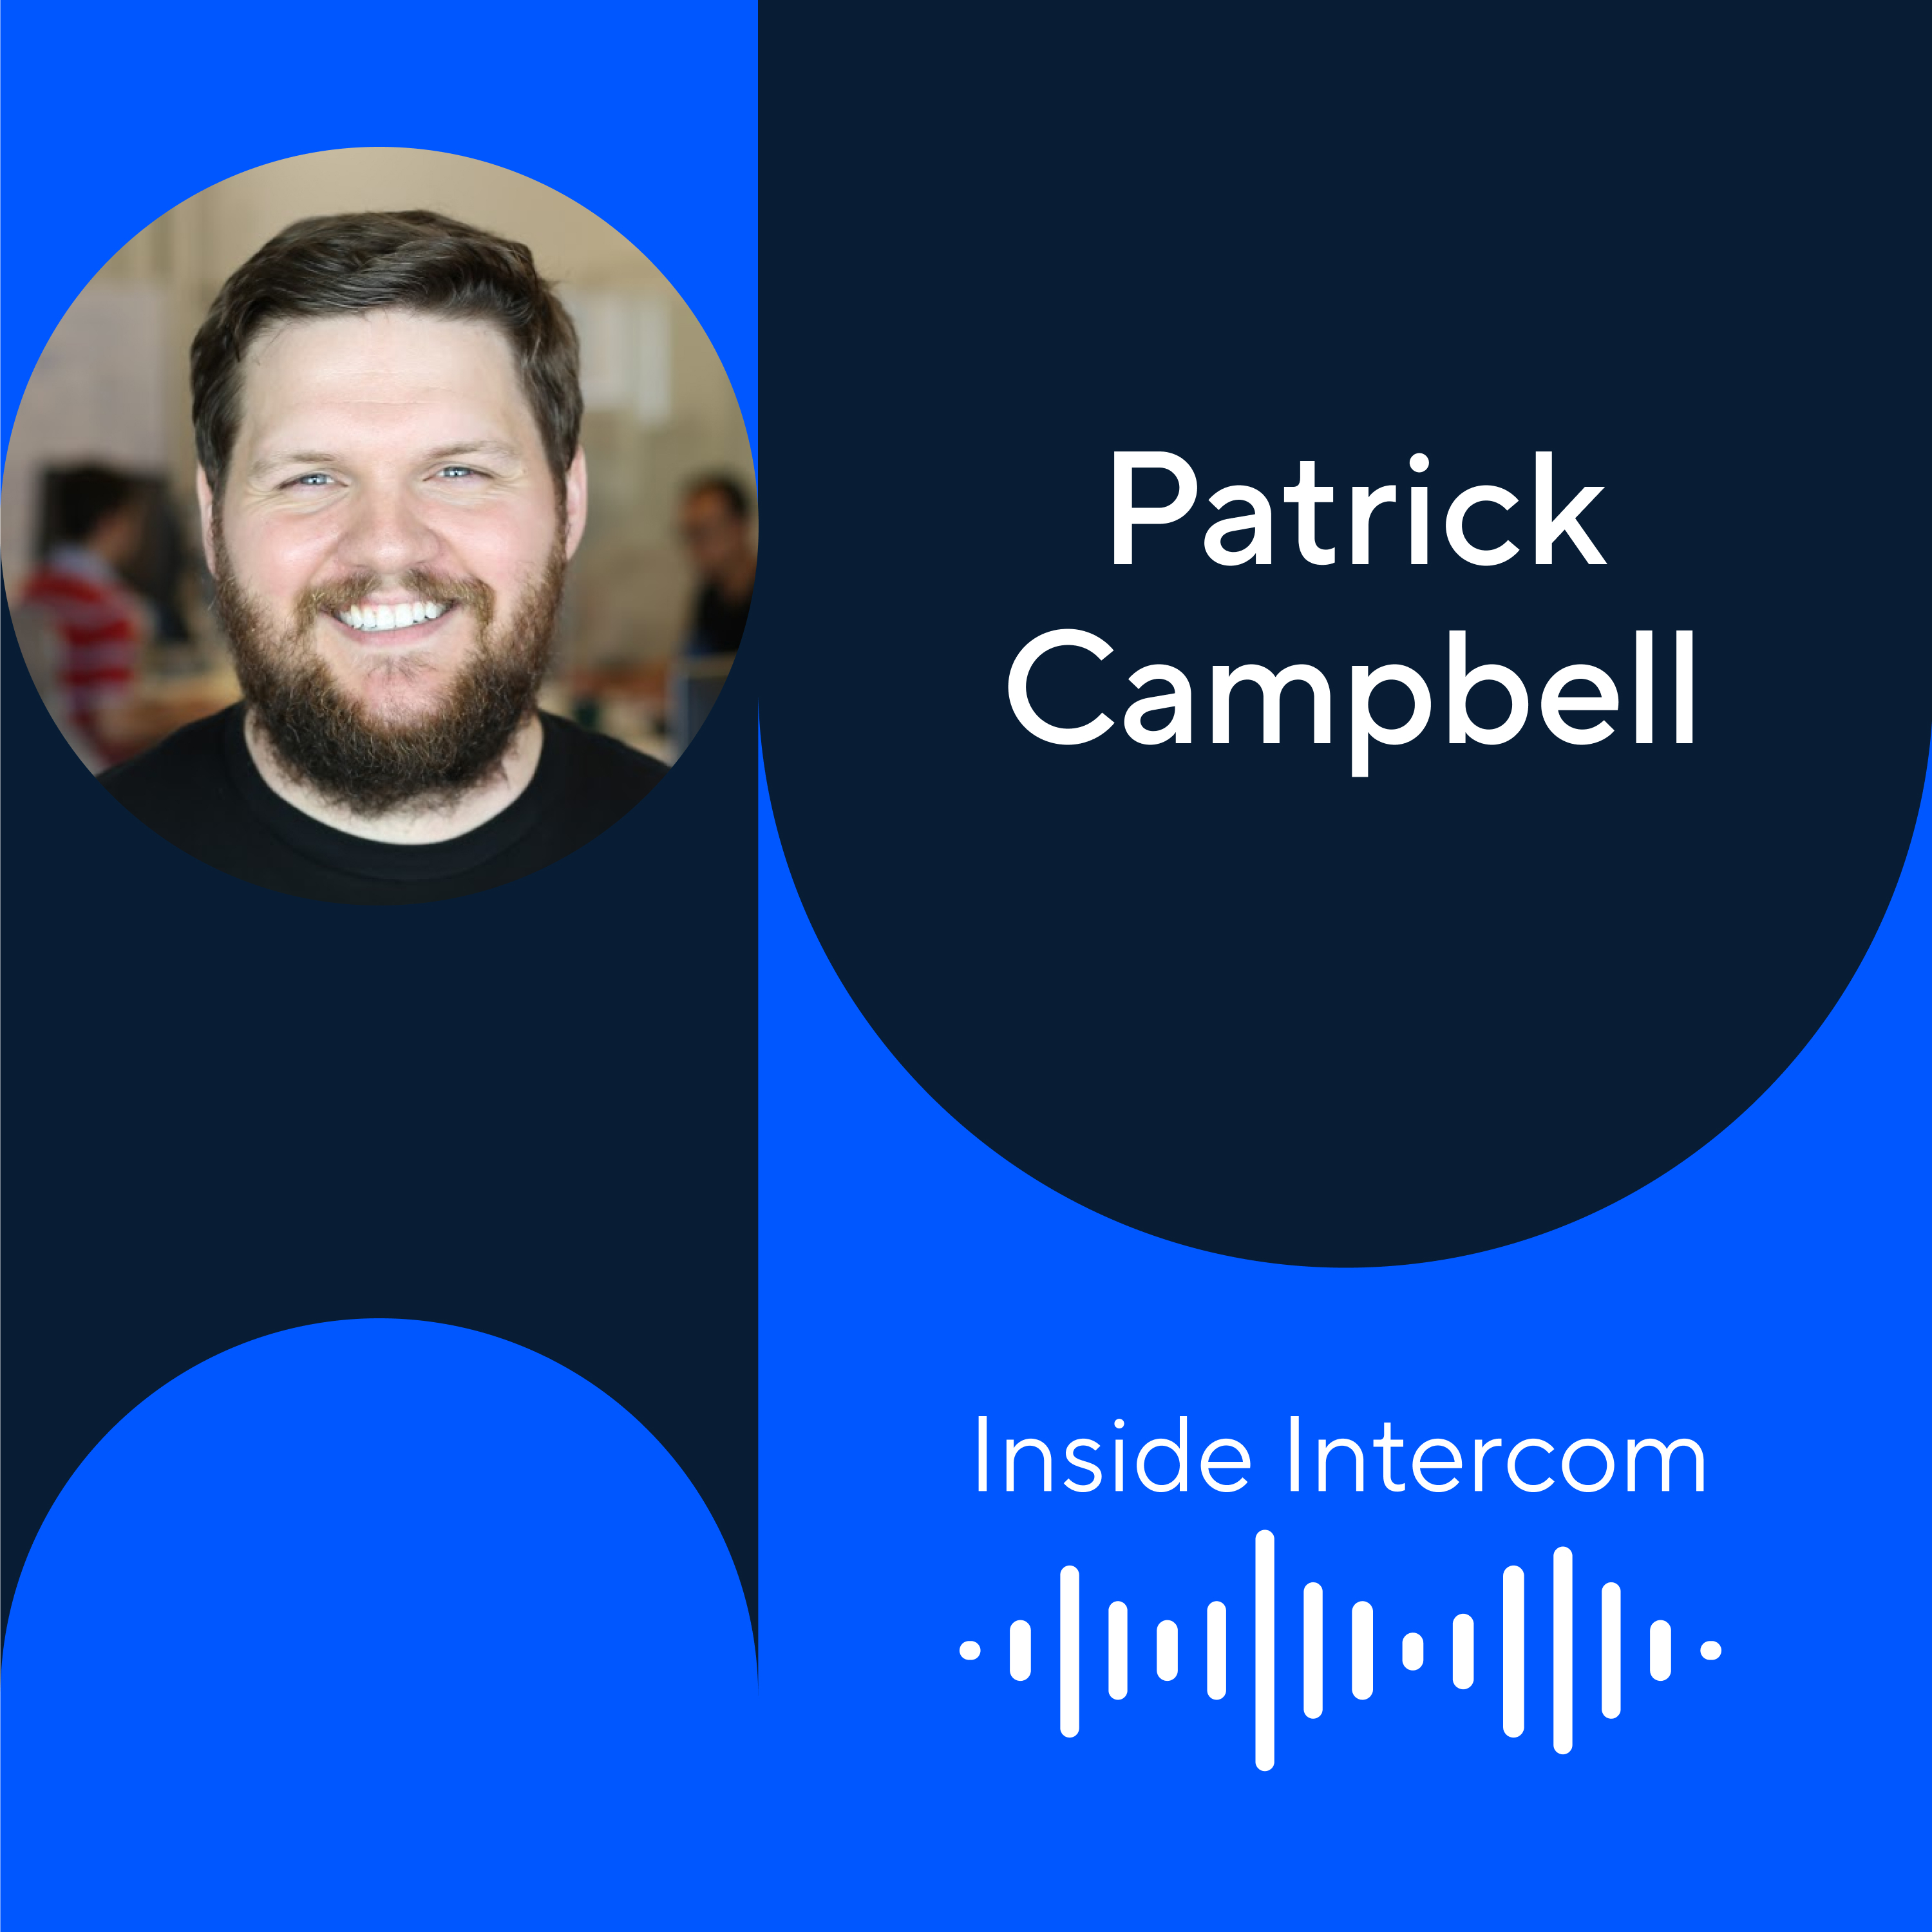 ProfitWell founder Patrick Campbell on life after acquisition